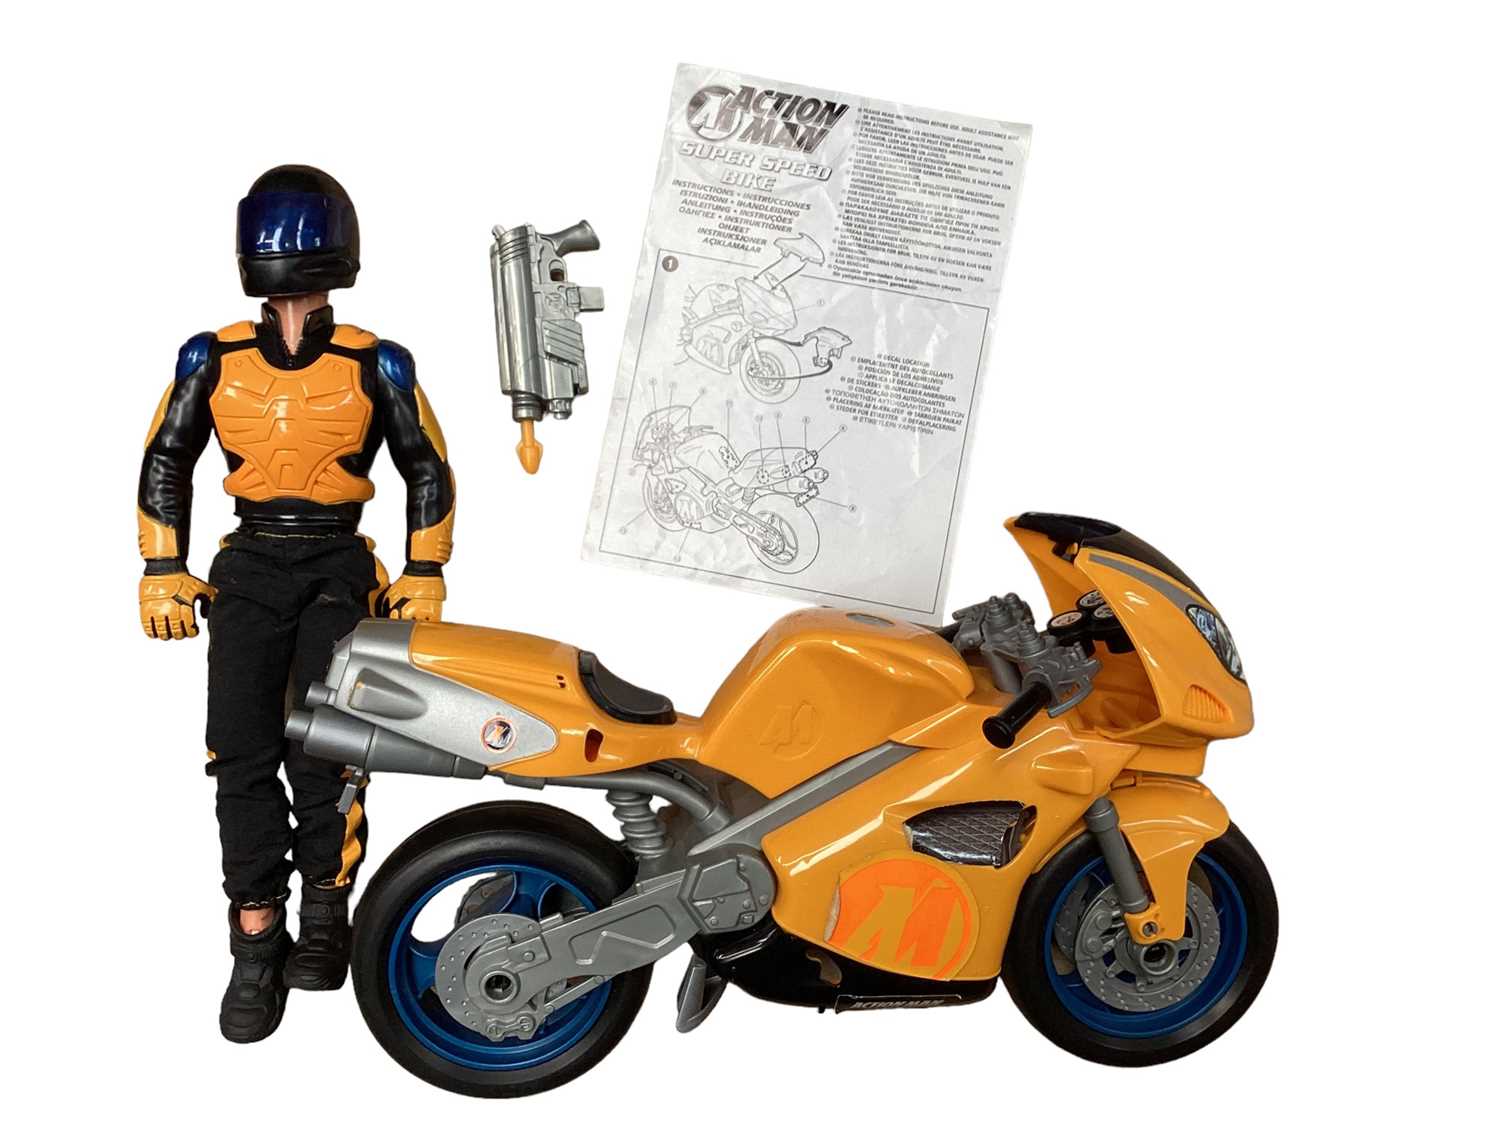 Hasbro Action Man Mission Grand Prix, boxed, plus motorcycle, two action figures and captain Scarlet - Image 3 of 6